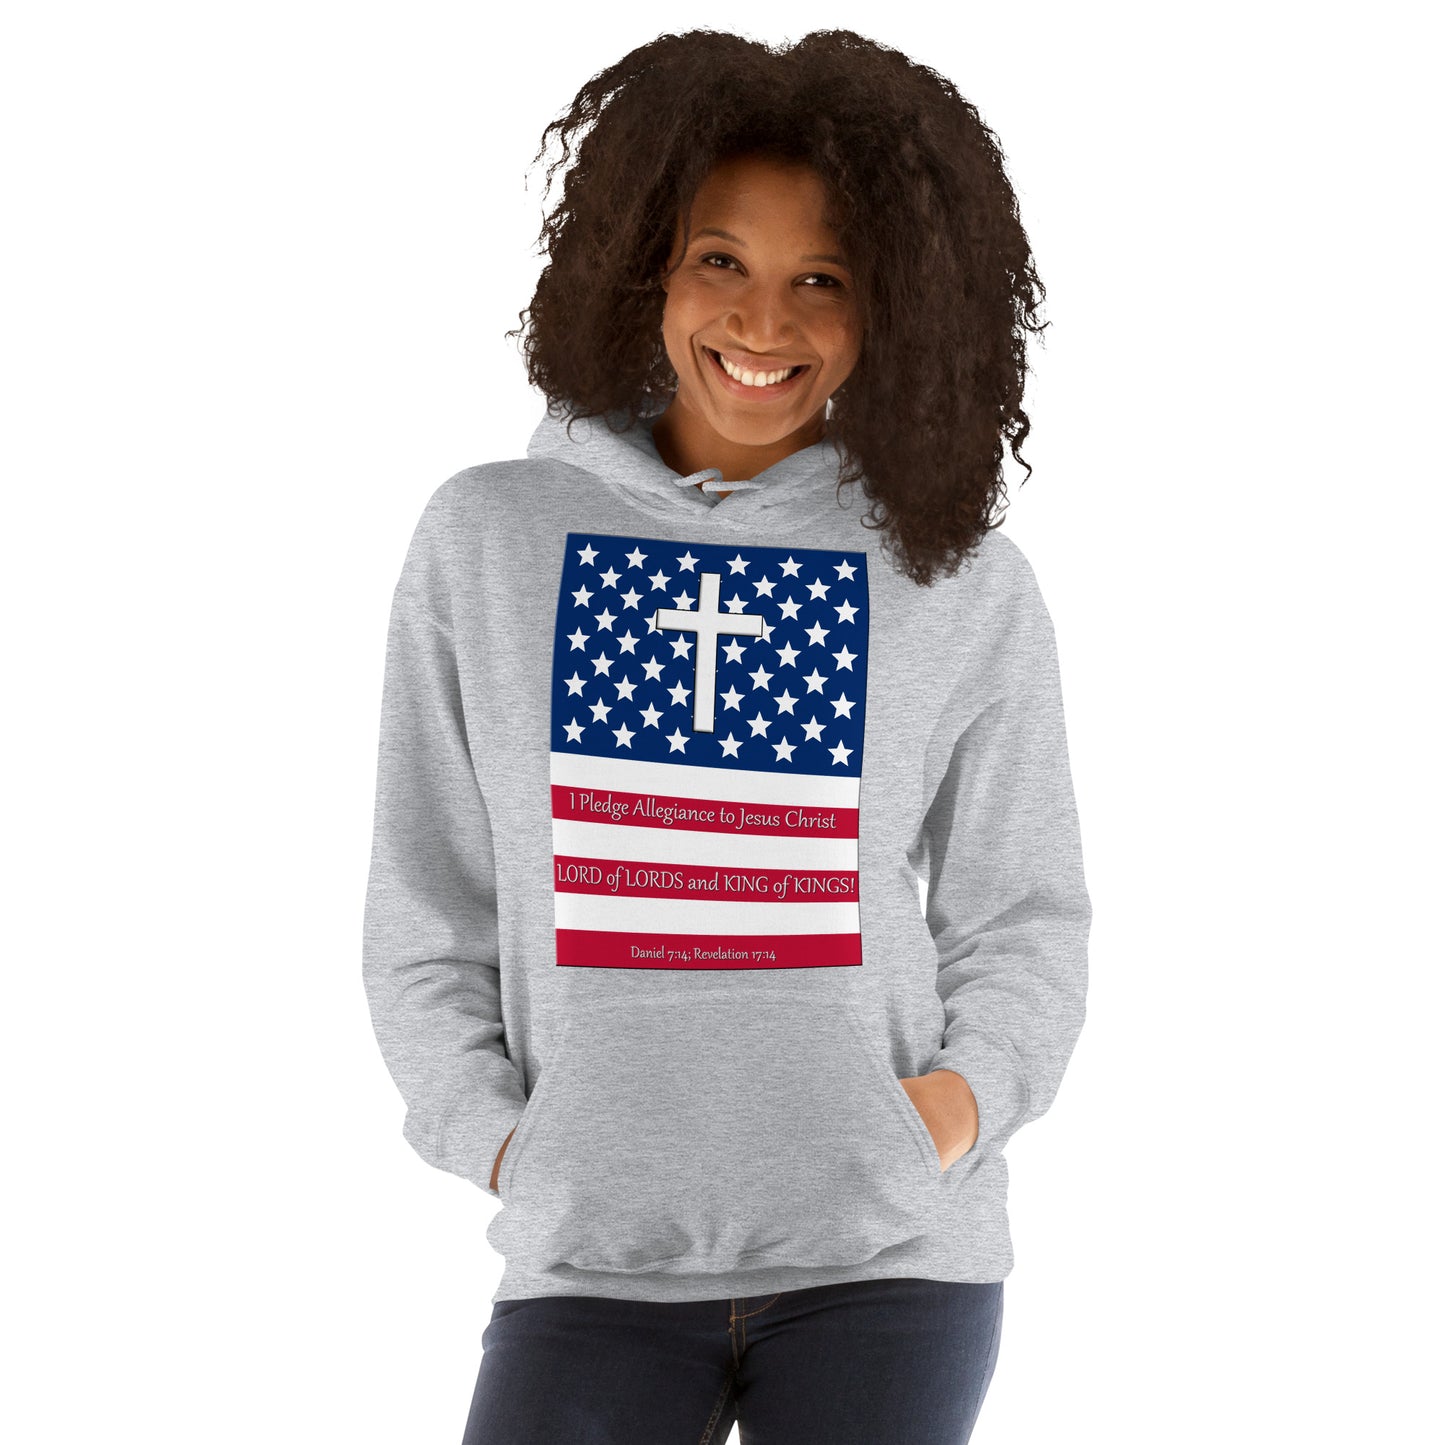 A019 Hoodie – Gildan 18500 Unisex Hoodie Featuring the Stars and Stripes, a Cross, and the Text “I Pledge Allegiance to Jesus Christ LORD of LORDS and KING of KINGS!”